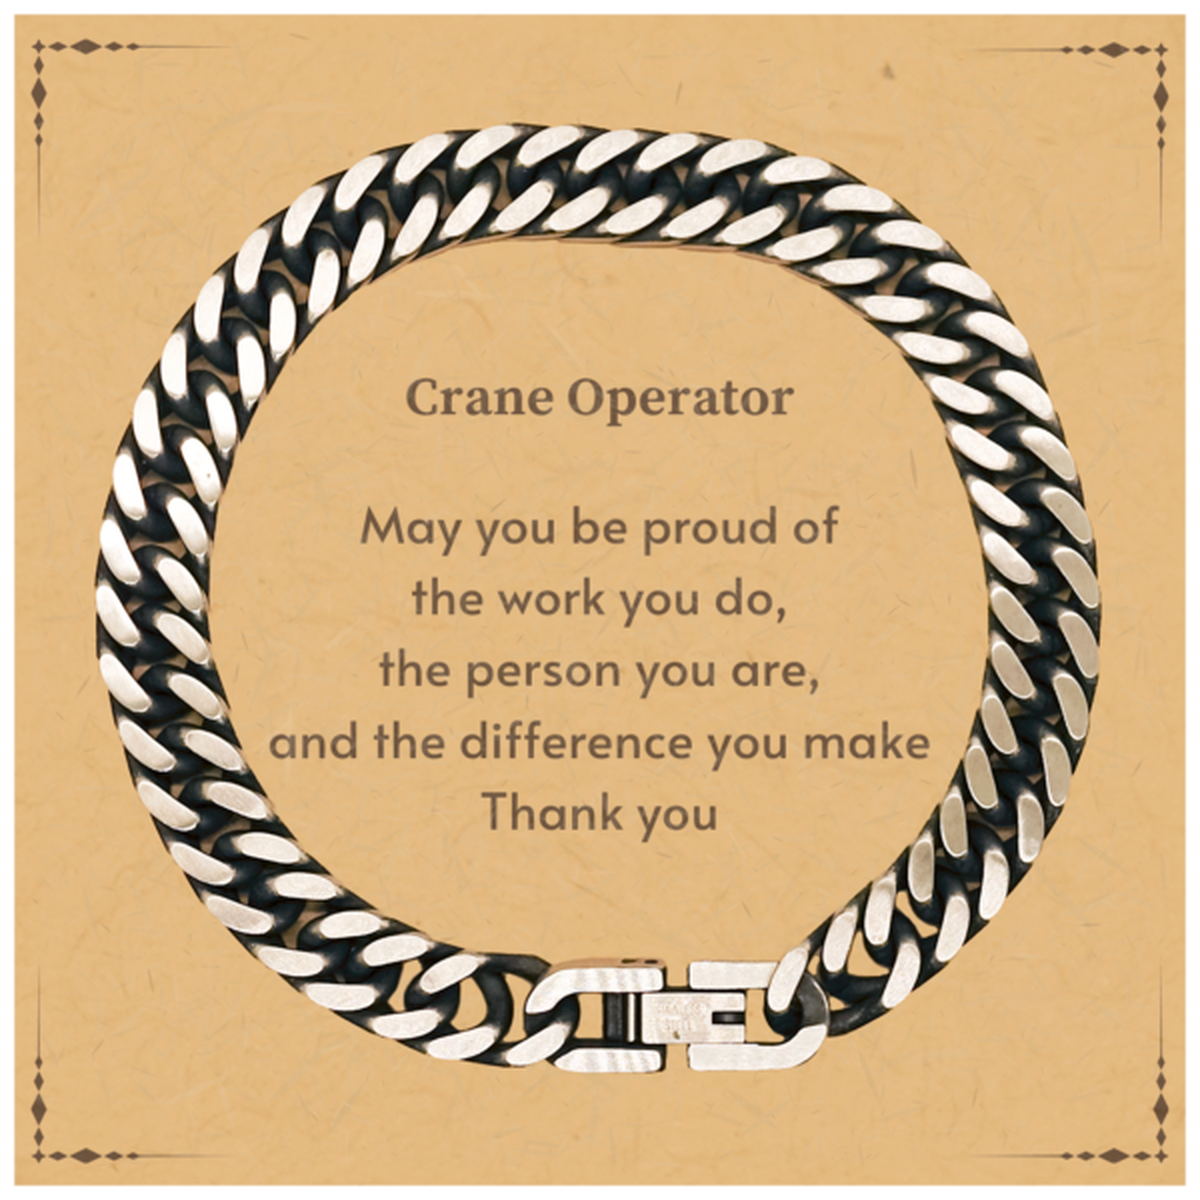 Heartwarming Cuban Link Chain Bracelet Retirement Coworkers Gifts for Crane Operator, Crane Operator May You be proud of the work you do, the person you are Gifts for Boss Men Women Friends